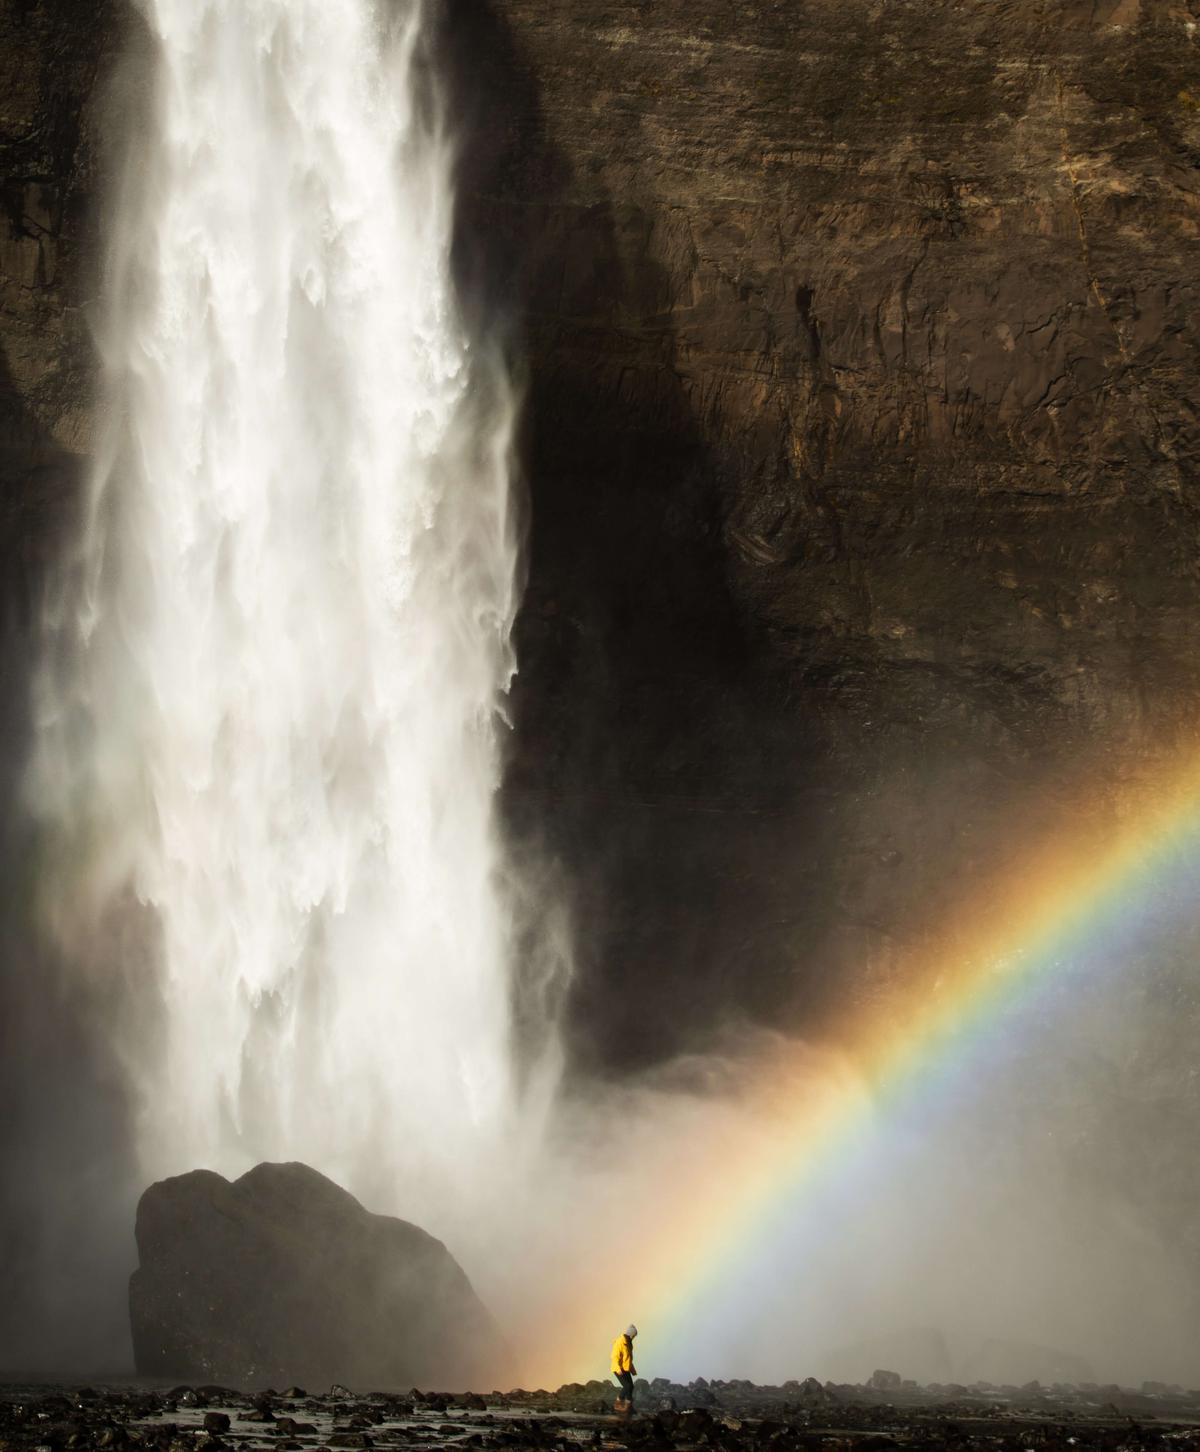 A girl in a yellow raincoat stands underneath rainbow at the bottom of a waterfall in Iceland